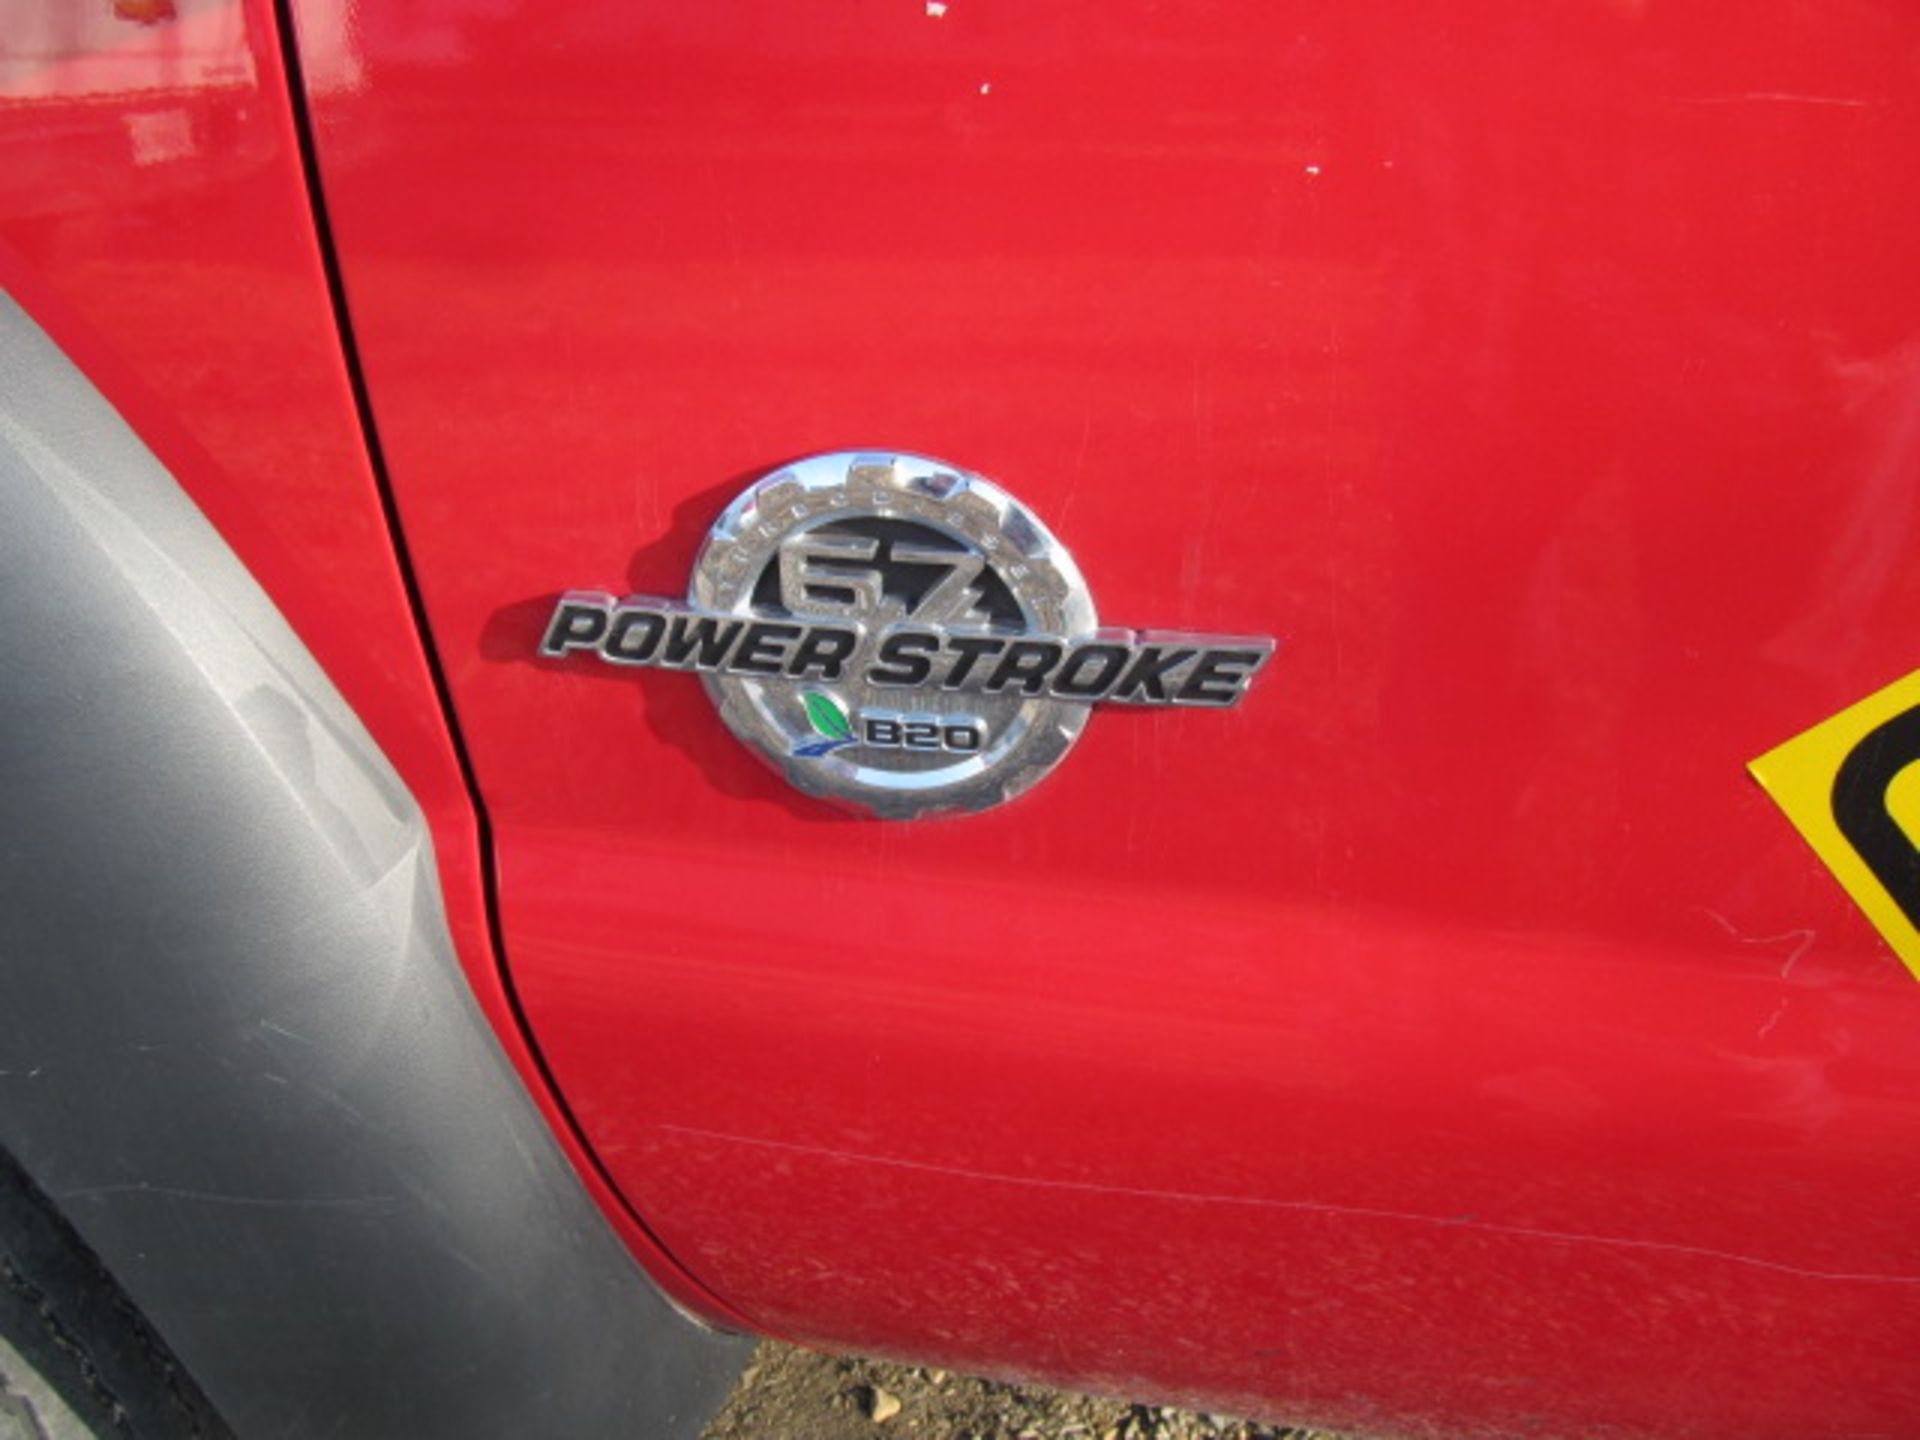 2014 Ford F550 Stakebed Truck; 6.7L Power Stroke B20 (VIN: 1FDUF5GT5EEB45103) [Estimated Mileage: - Image 4 of 5